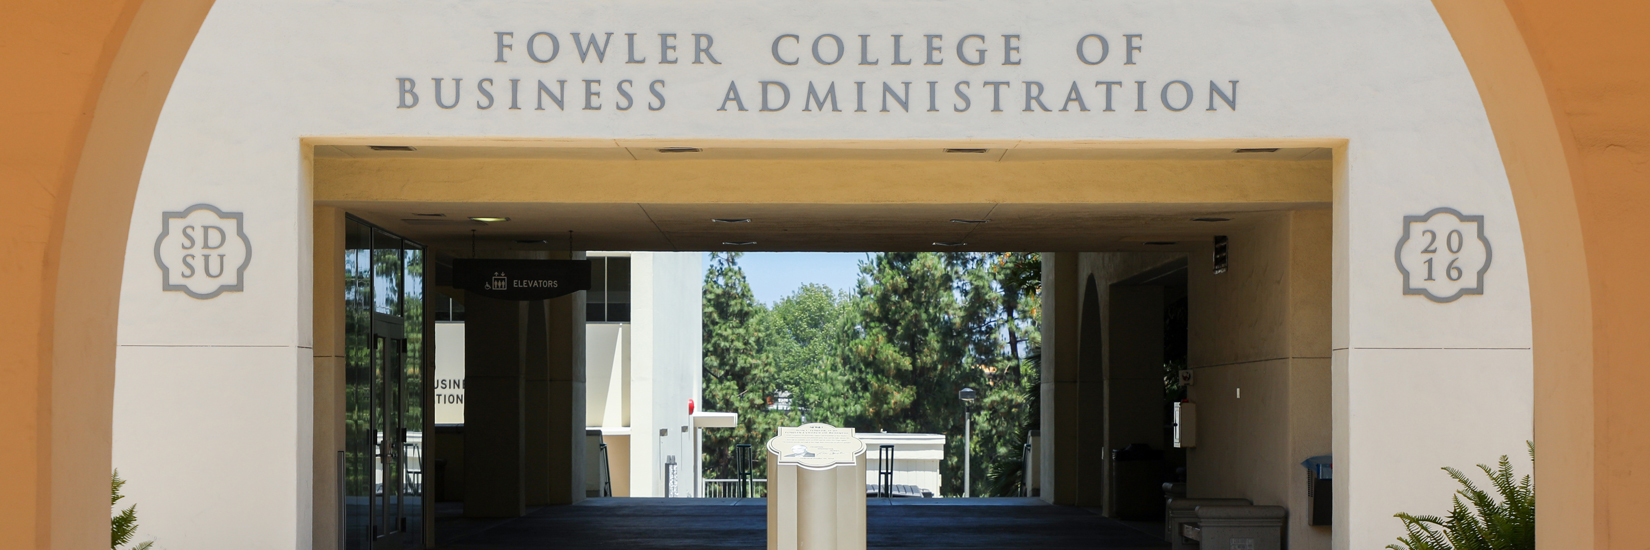 Fowler College of Business building